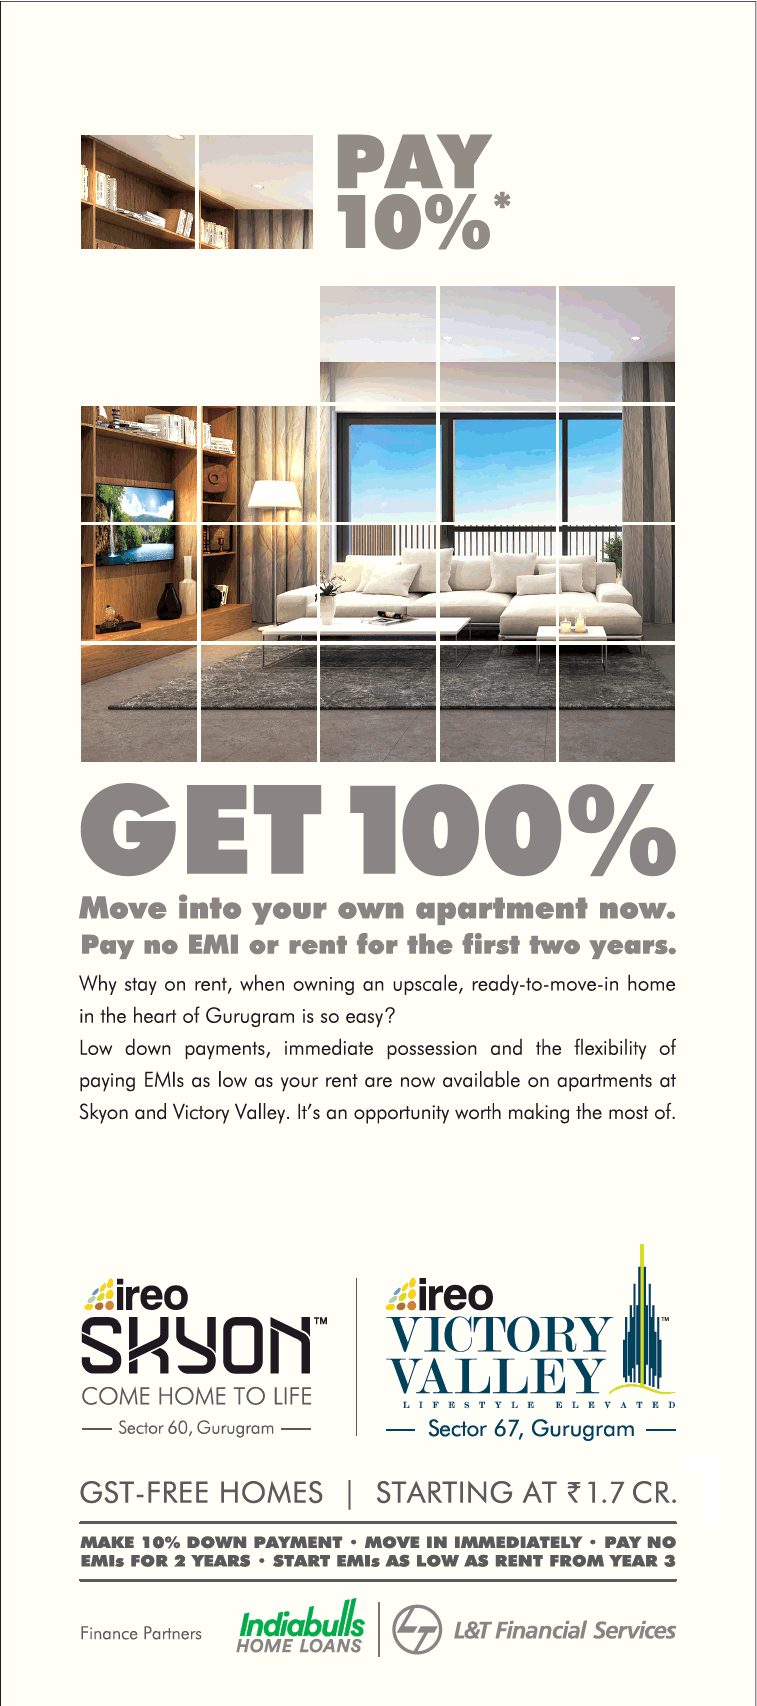 Pay 10%, Get 100% with No Rent No EMI at Ireo Victory Valley & Ireo Skyon, Gurgaon Update